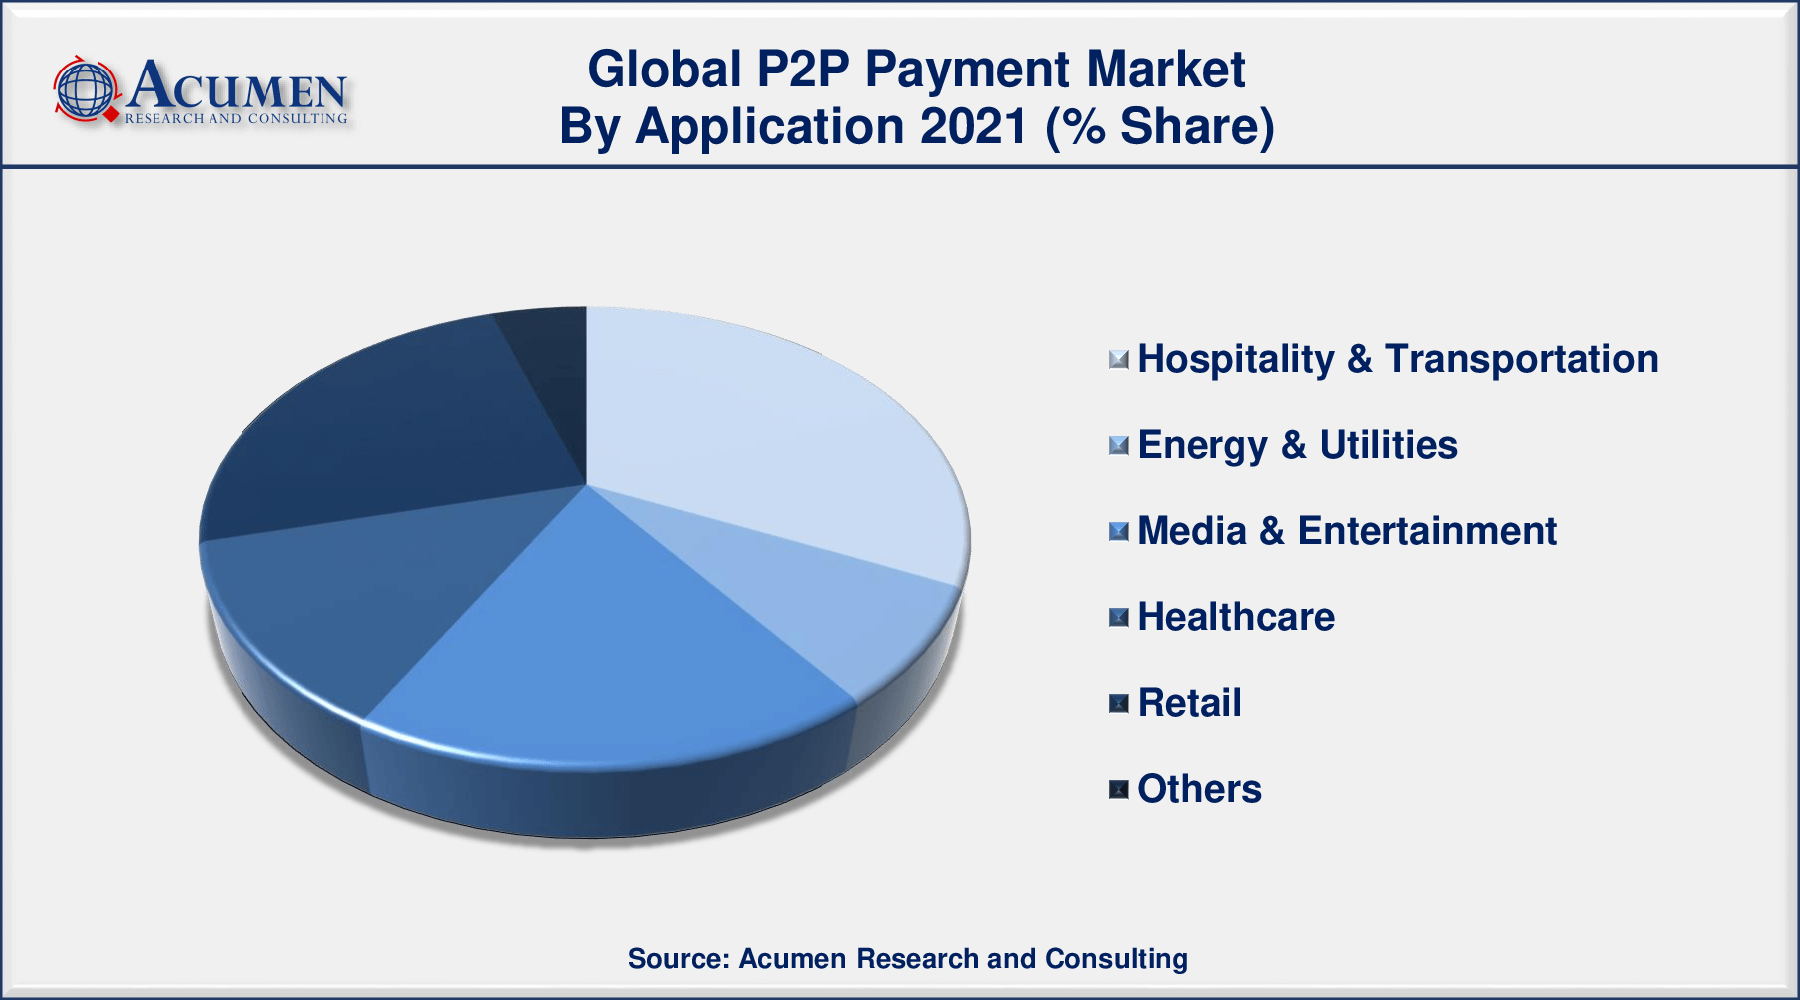 Based on application segment, hospitality & transportation will account for more than 32% of overall market share in 2021